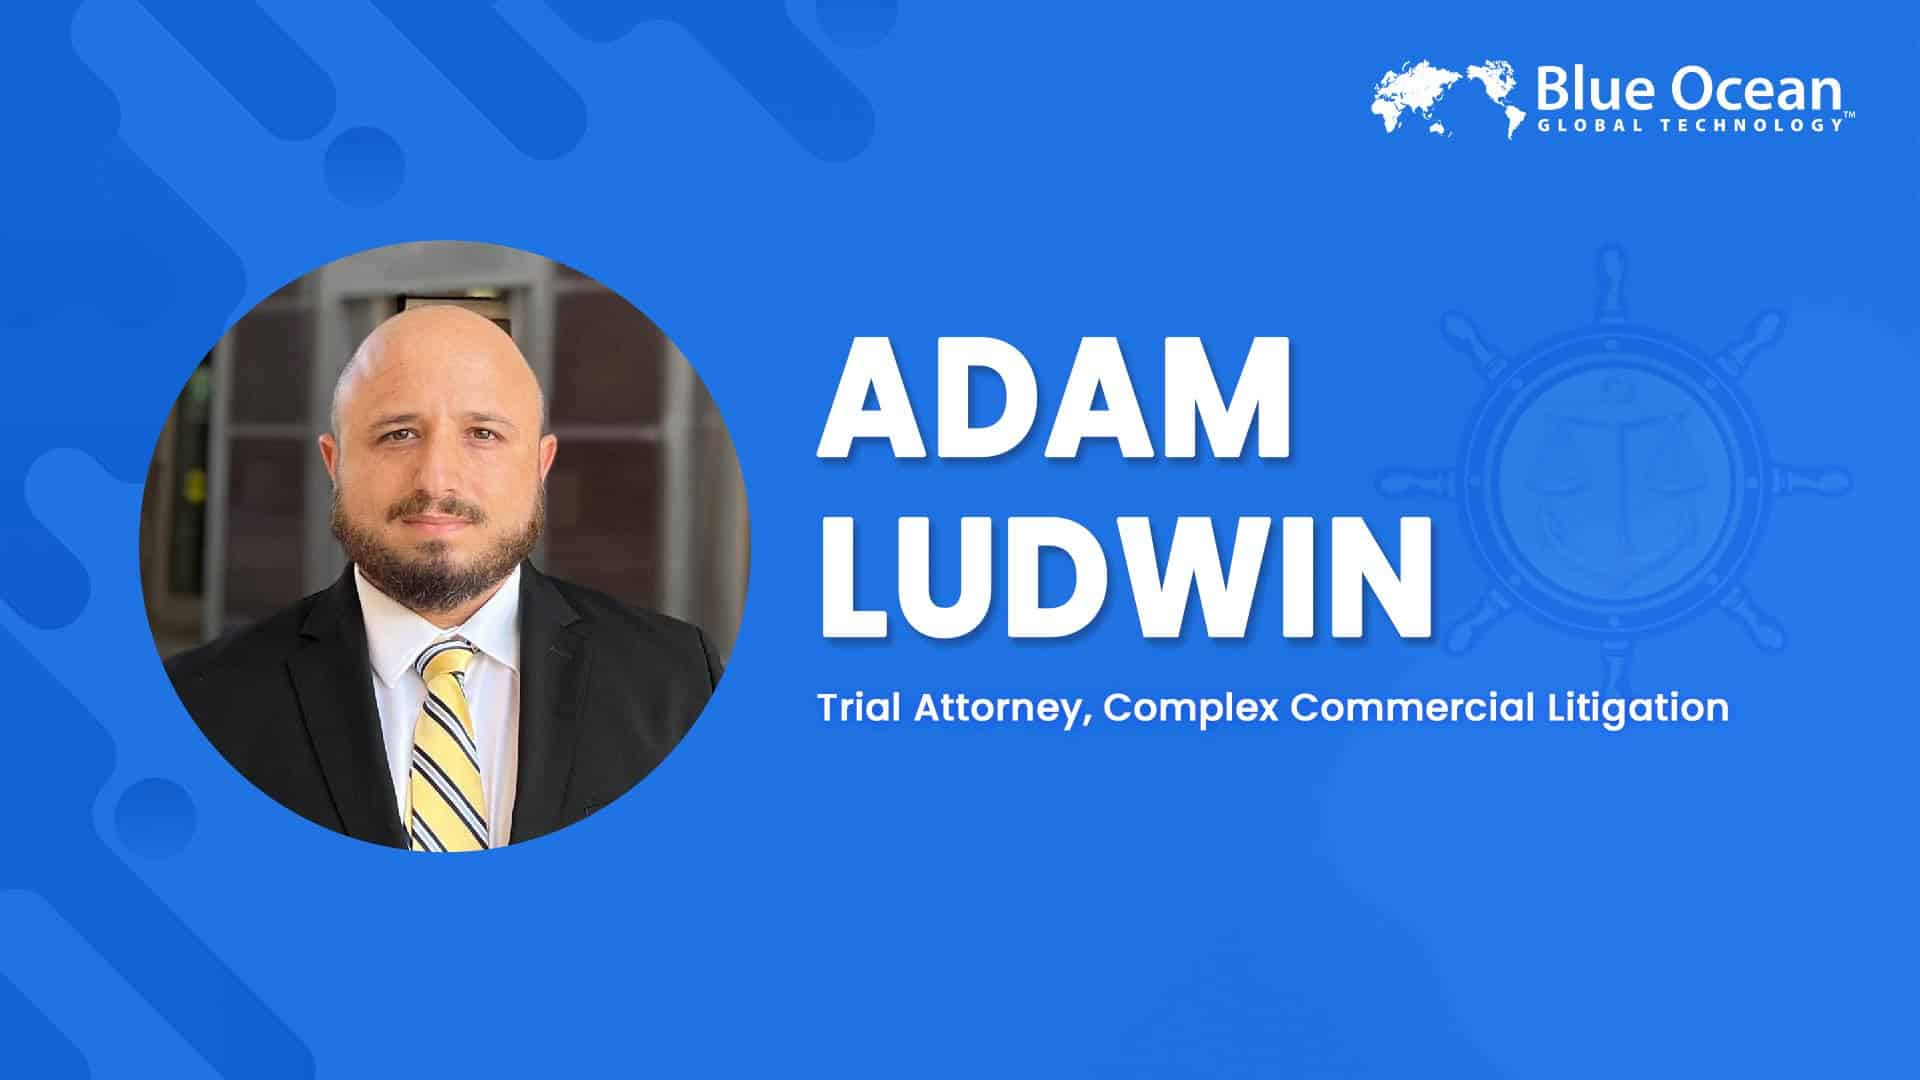 Blue Ocean Global Technology Interviews Adam Ludwin I Trial Attorney, Complex Commercial Litigation